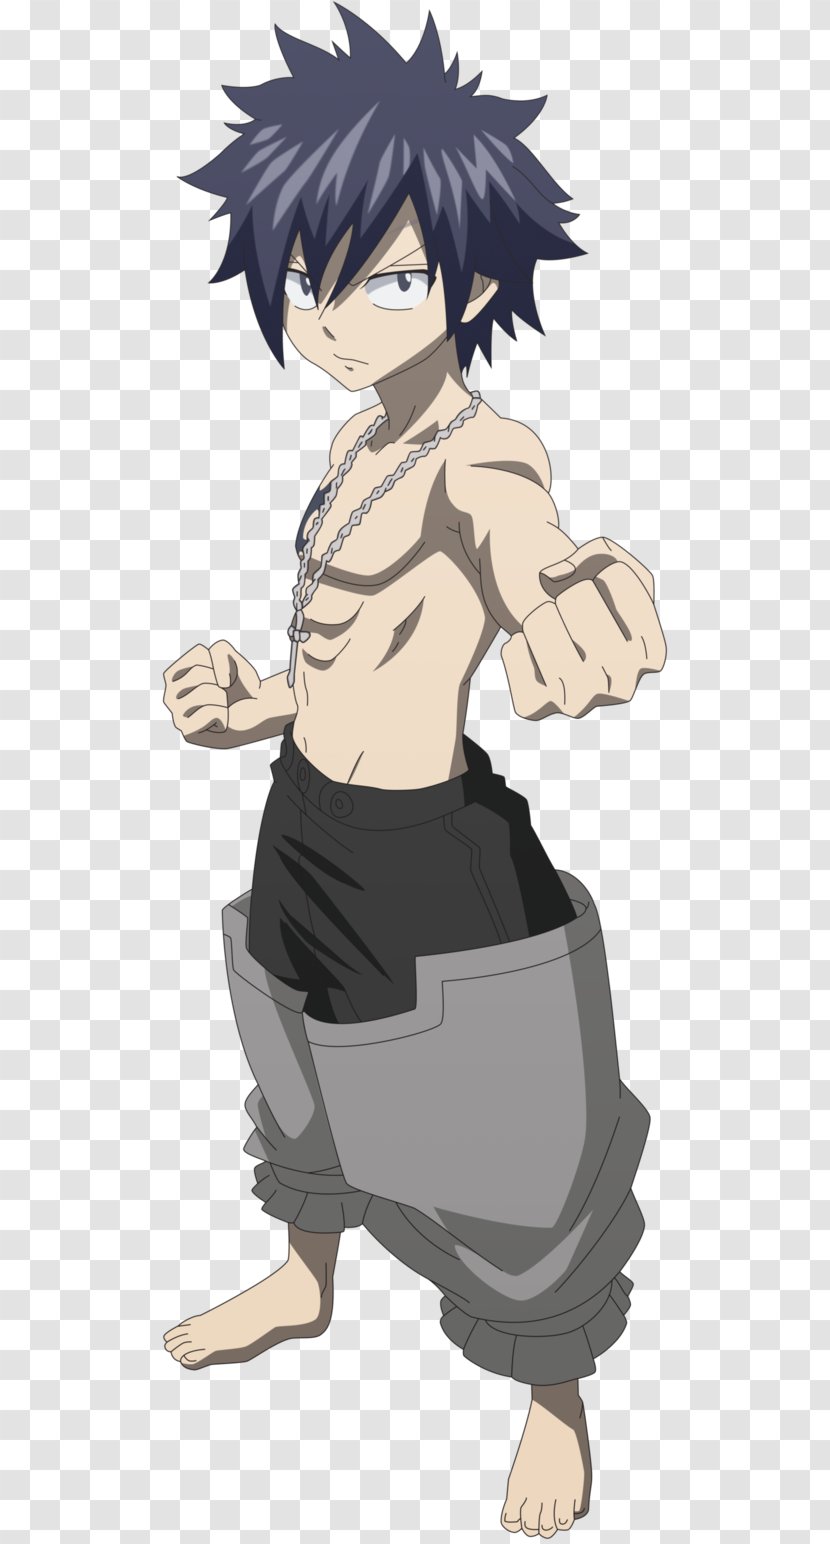 Gray Fullbuster Natsu Dragneel Fairy Tail Tale - Silhouette Transparent PNG